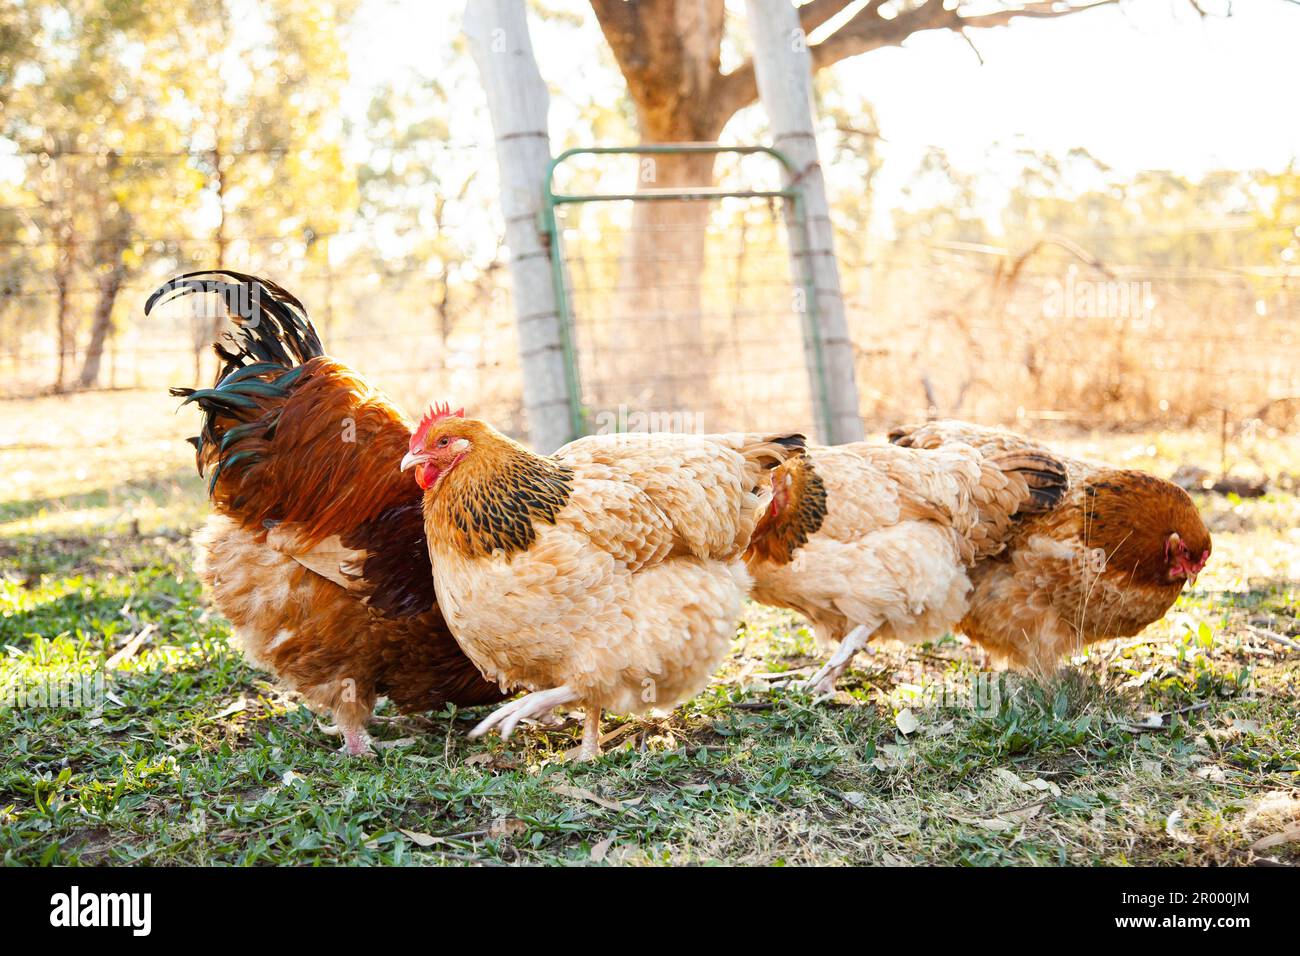 Buff Sussex hen and rooster in chook yard on Australian farm Stock Photo